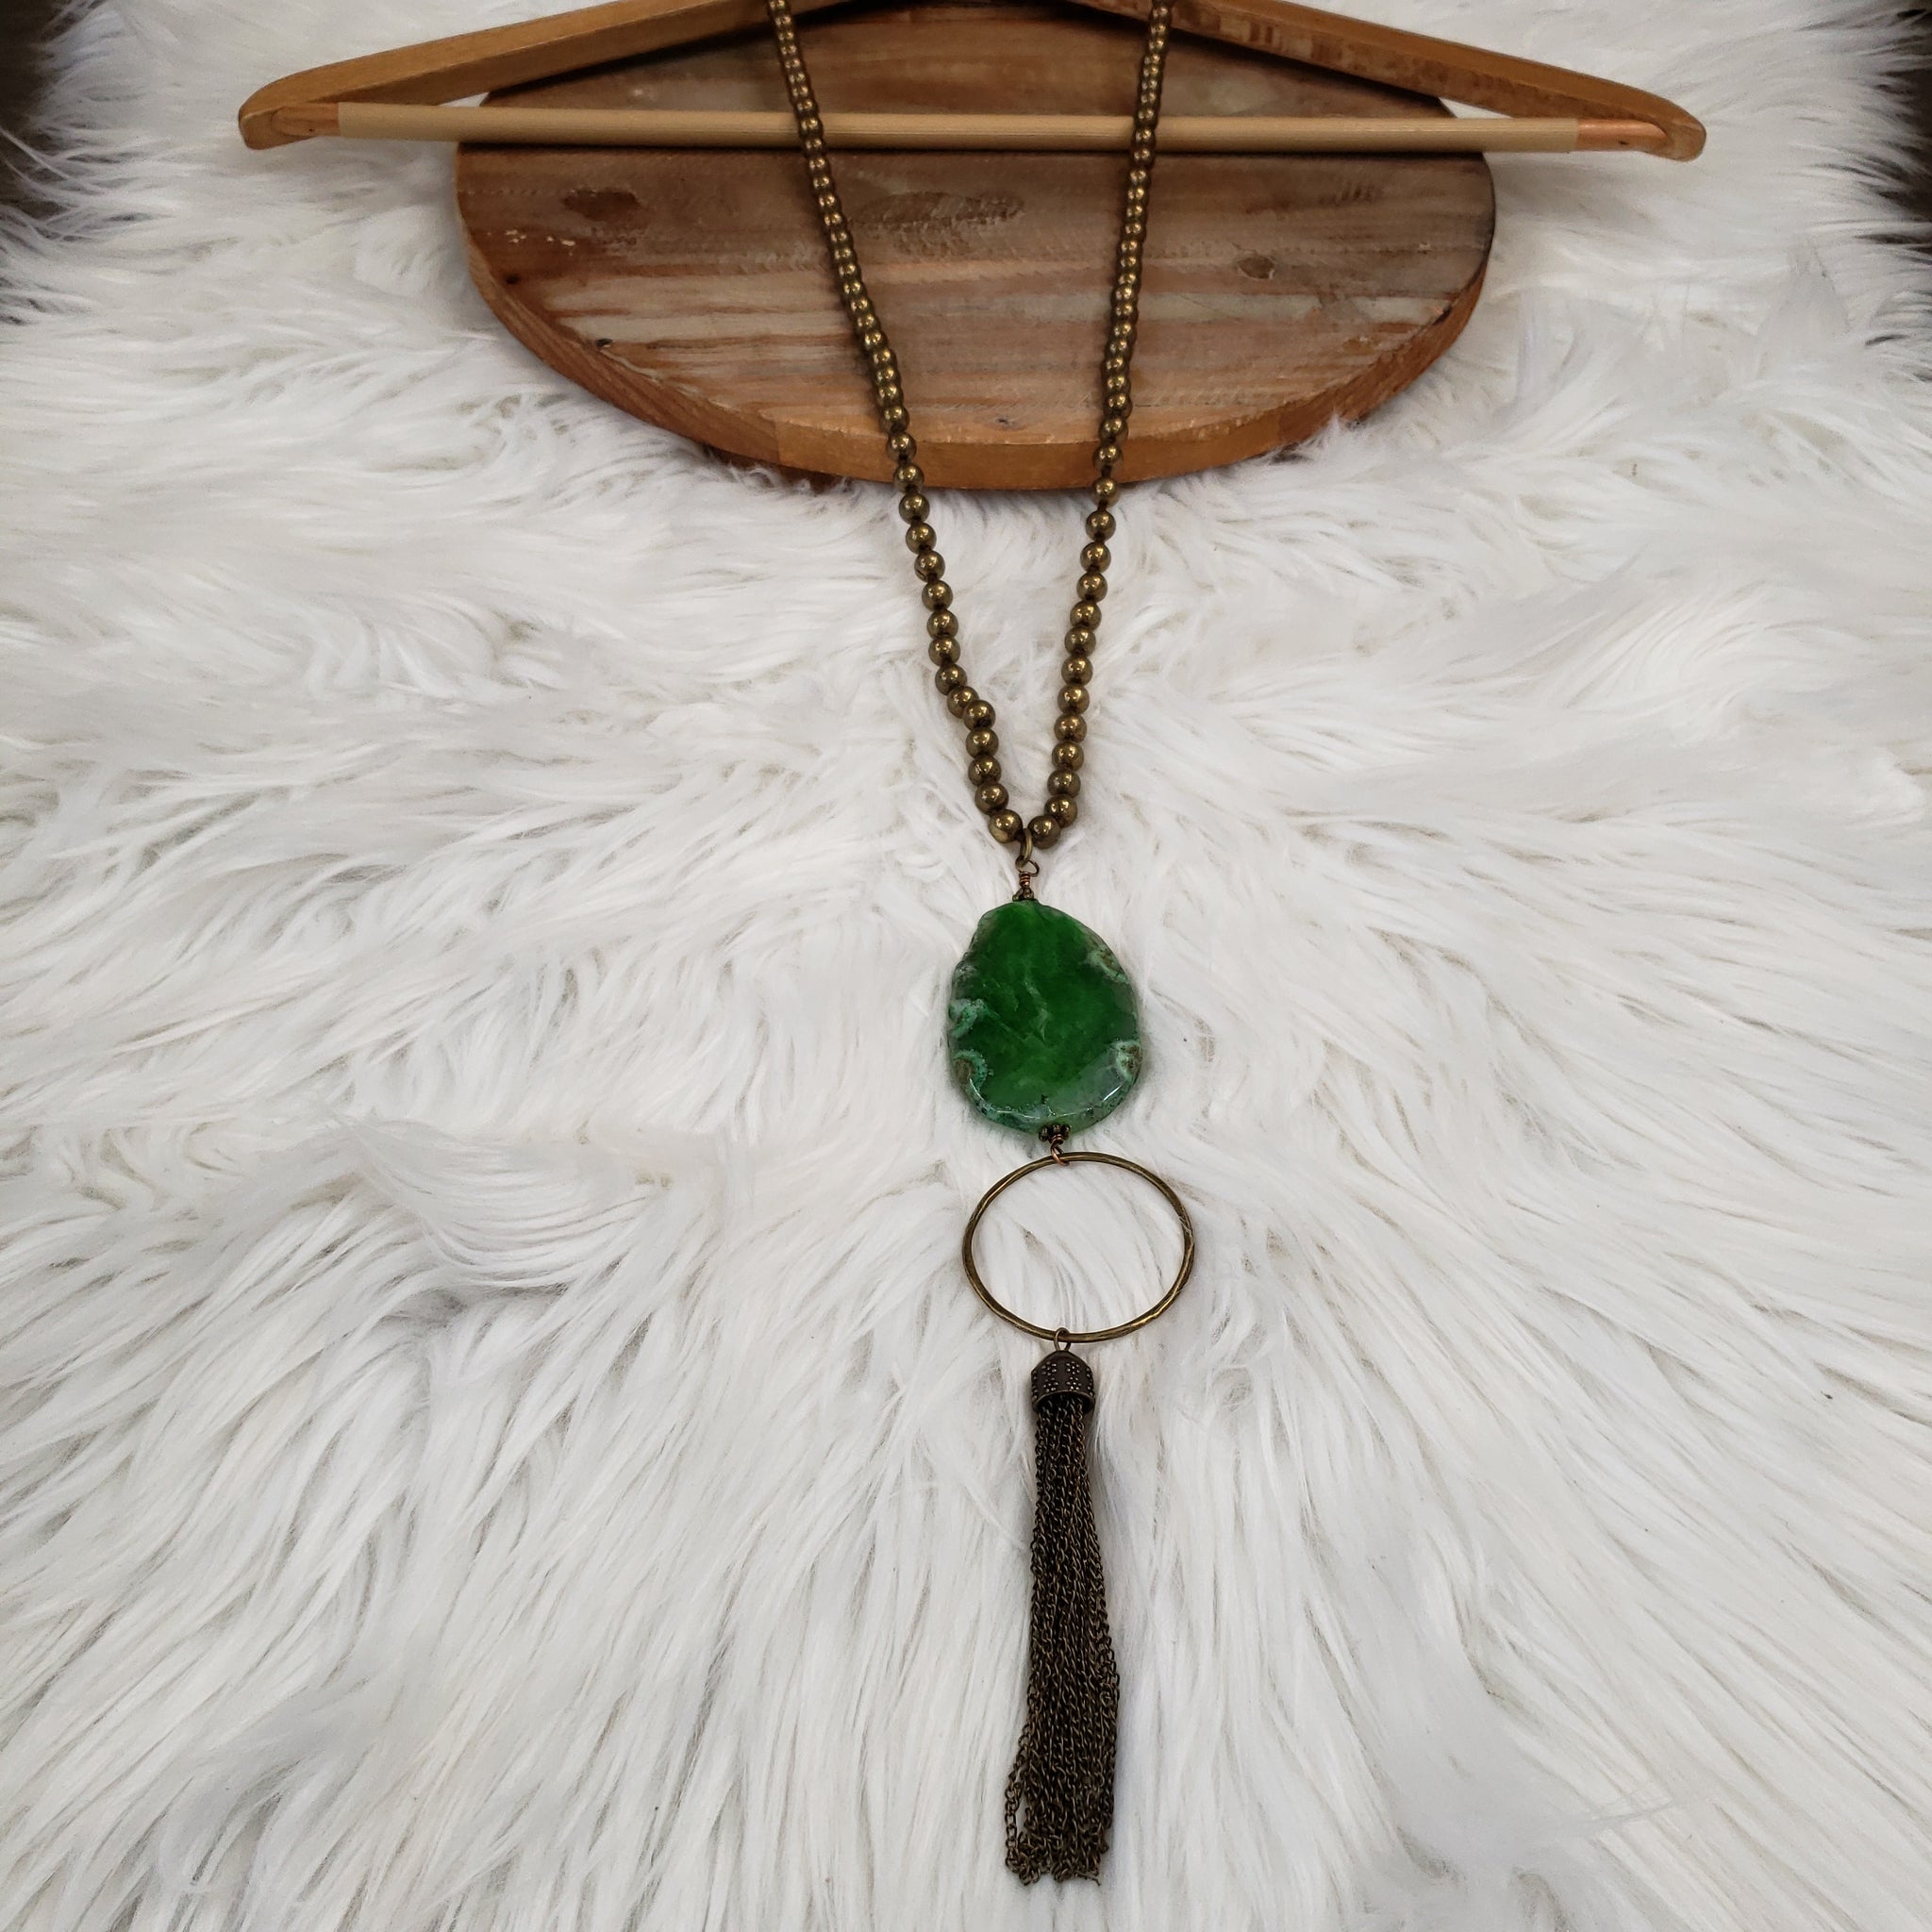 The Sure Way Green Necklace